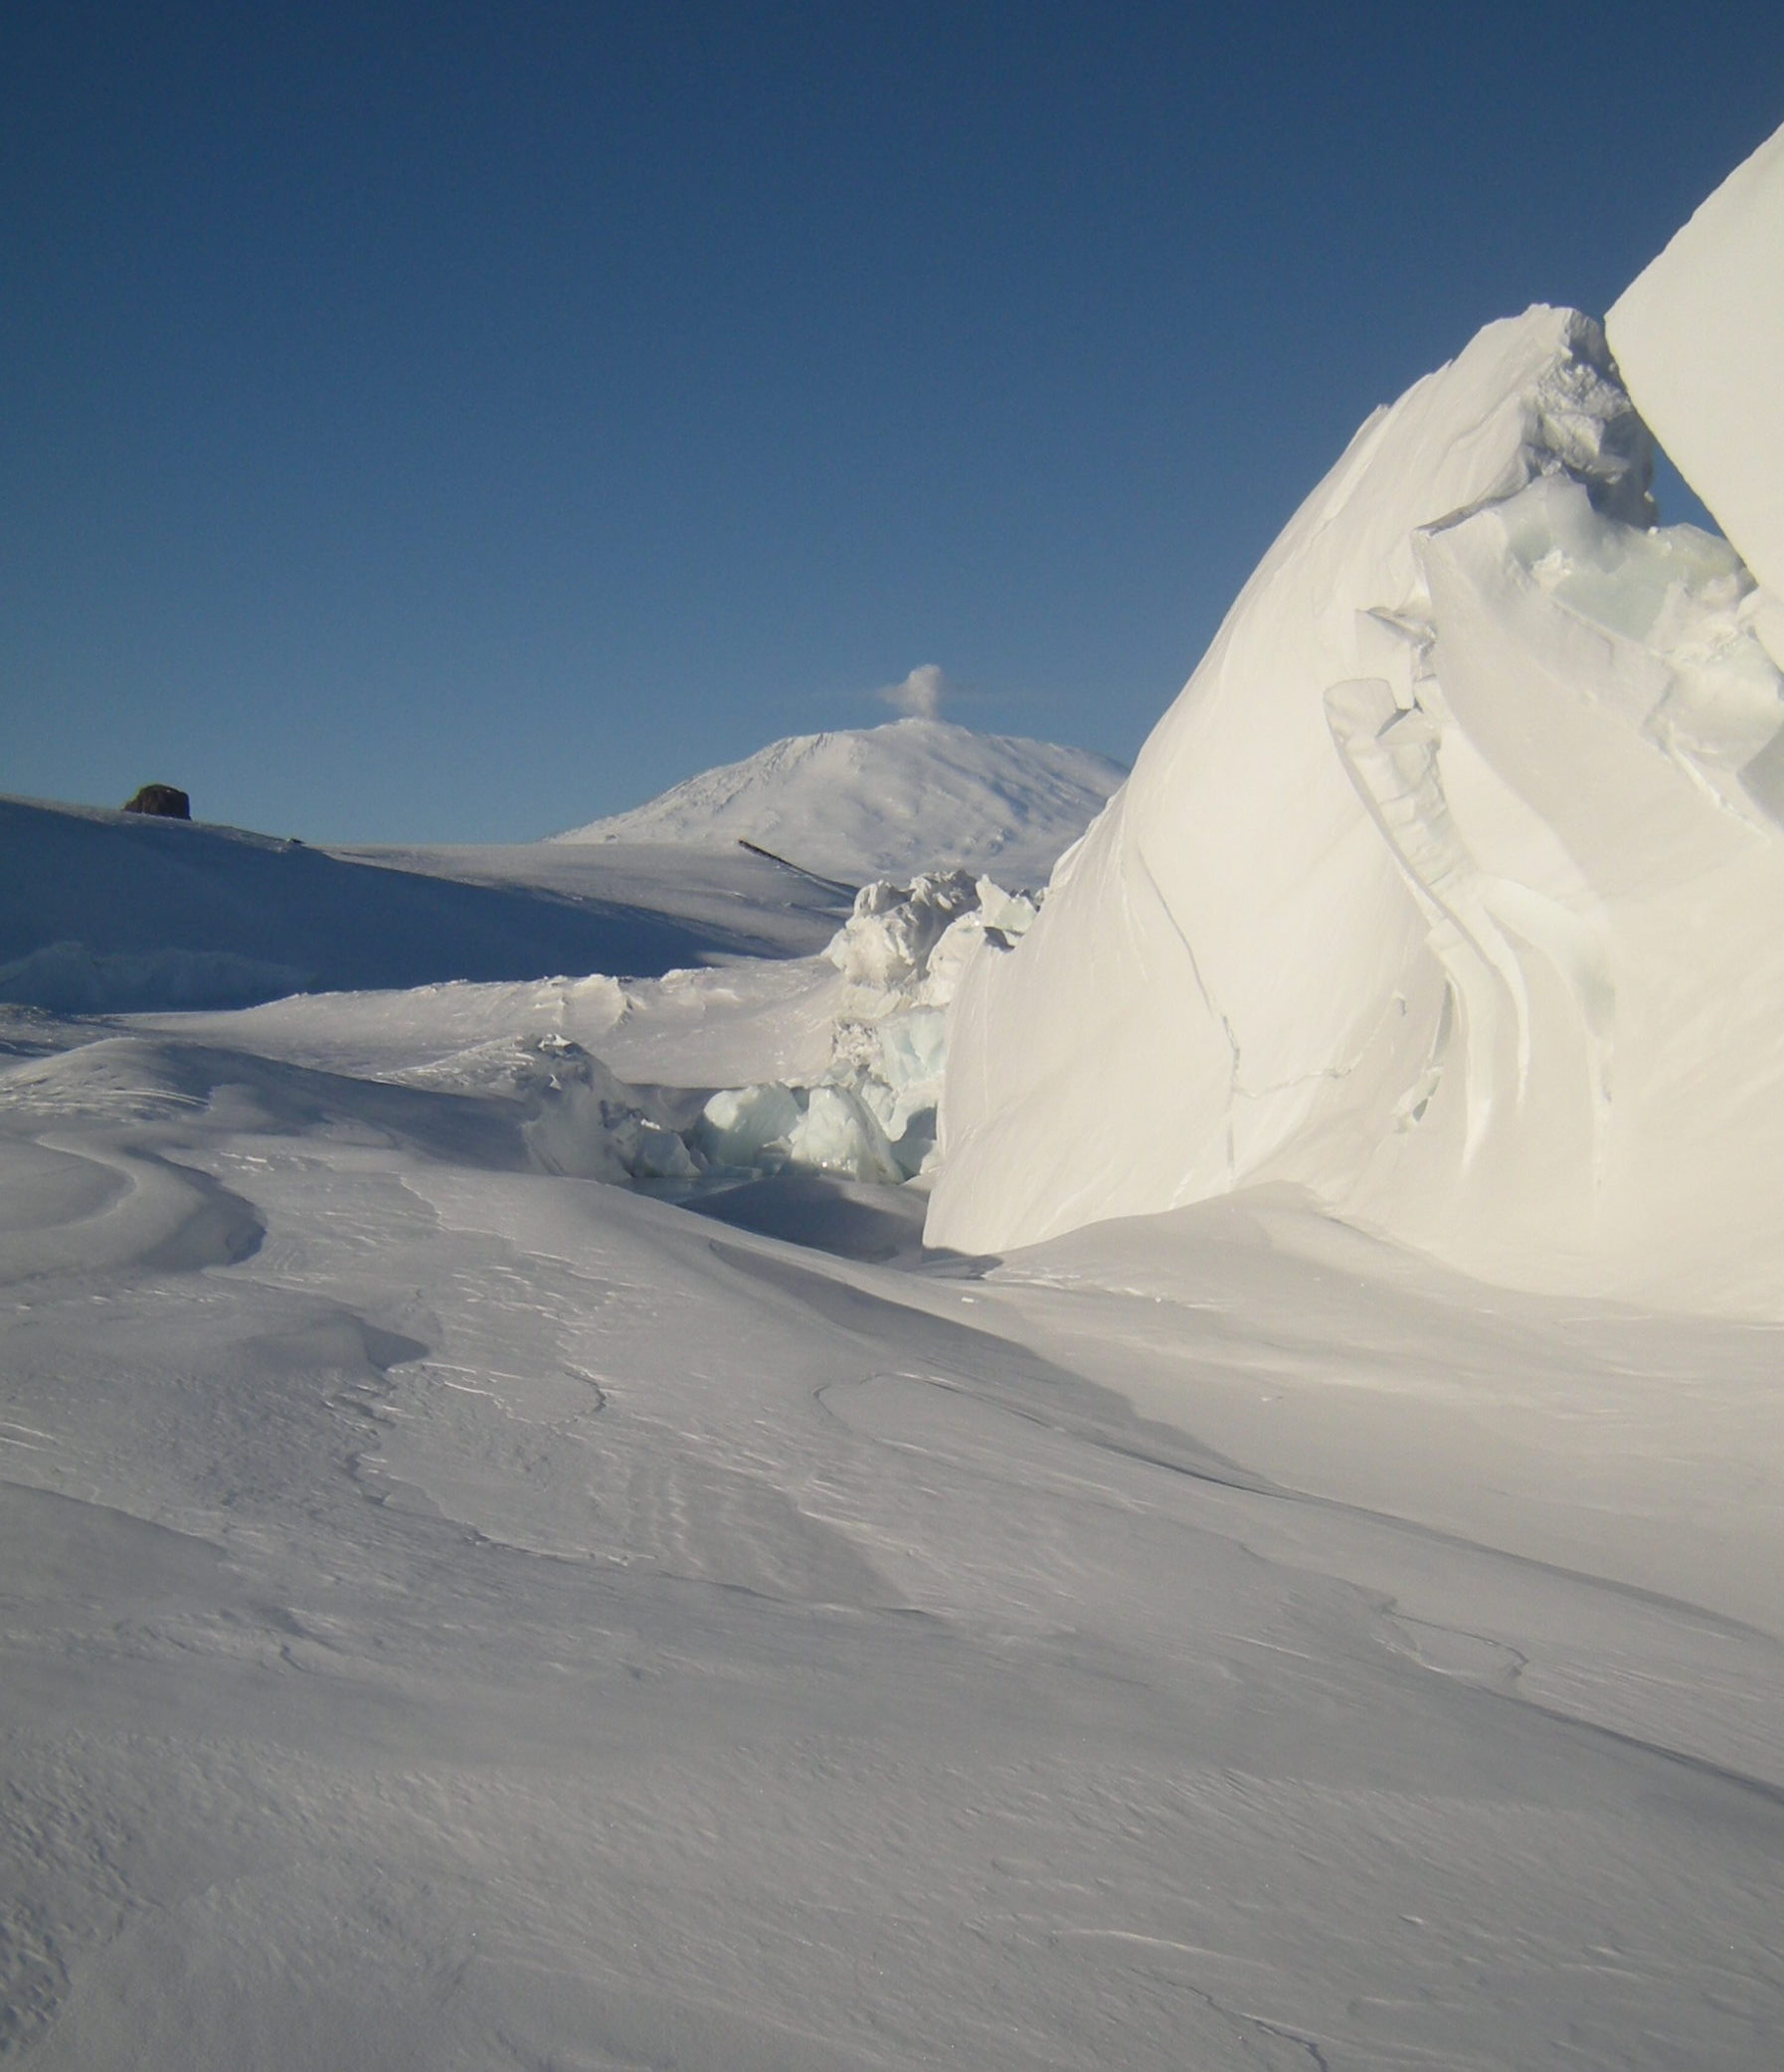 Pressure ridge on the sea ice, Erebus Volcano (with plume of steam) in the background